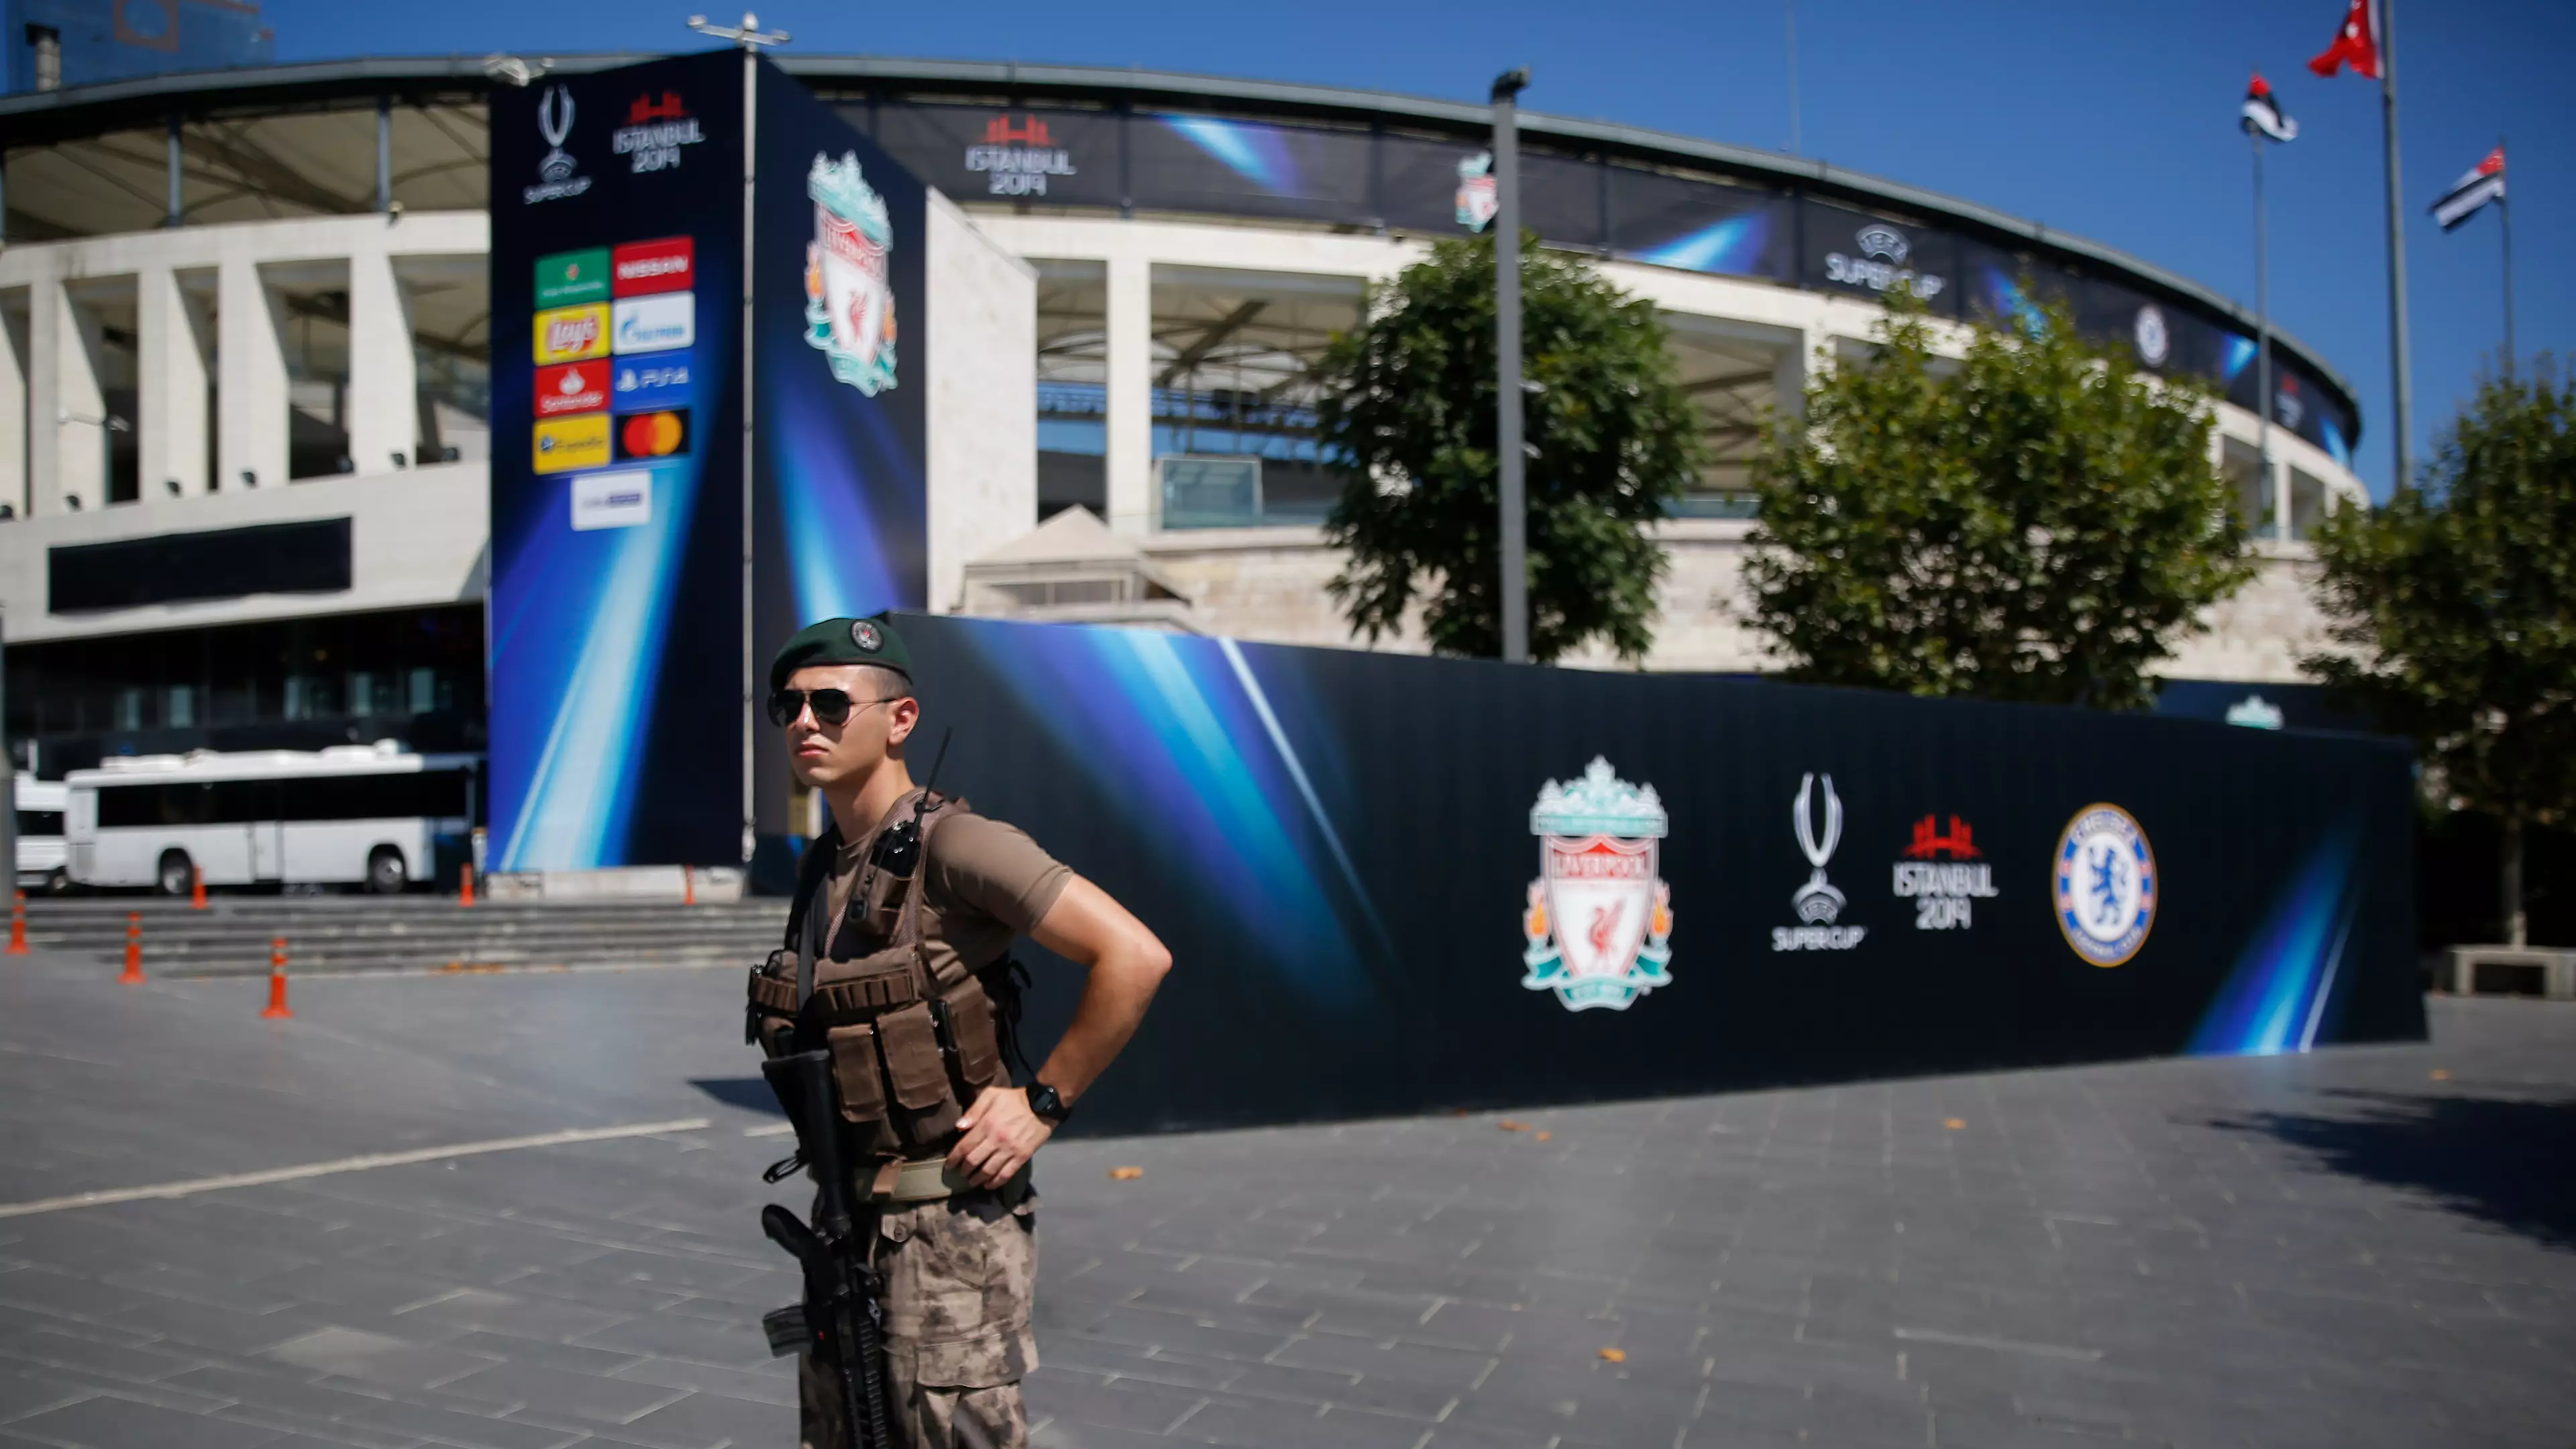 Liverpool vs Chelsea: Live Stream And TV Channel For UEFA Super Cup In Turkey